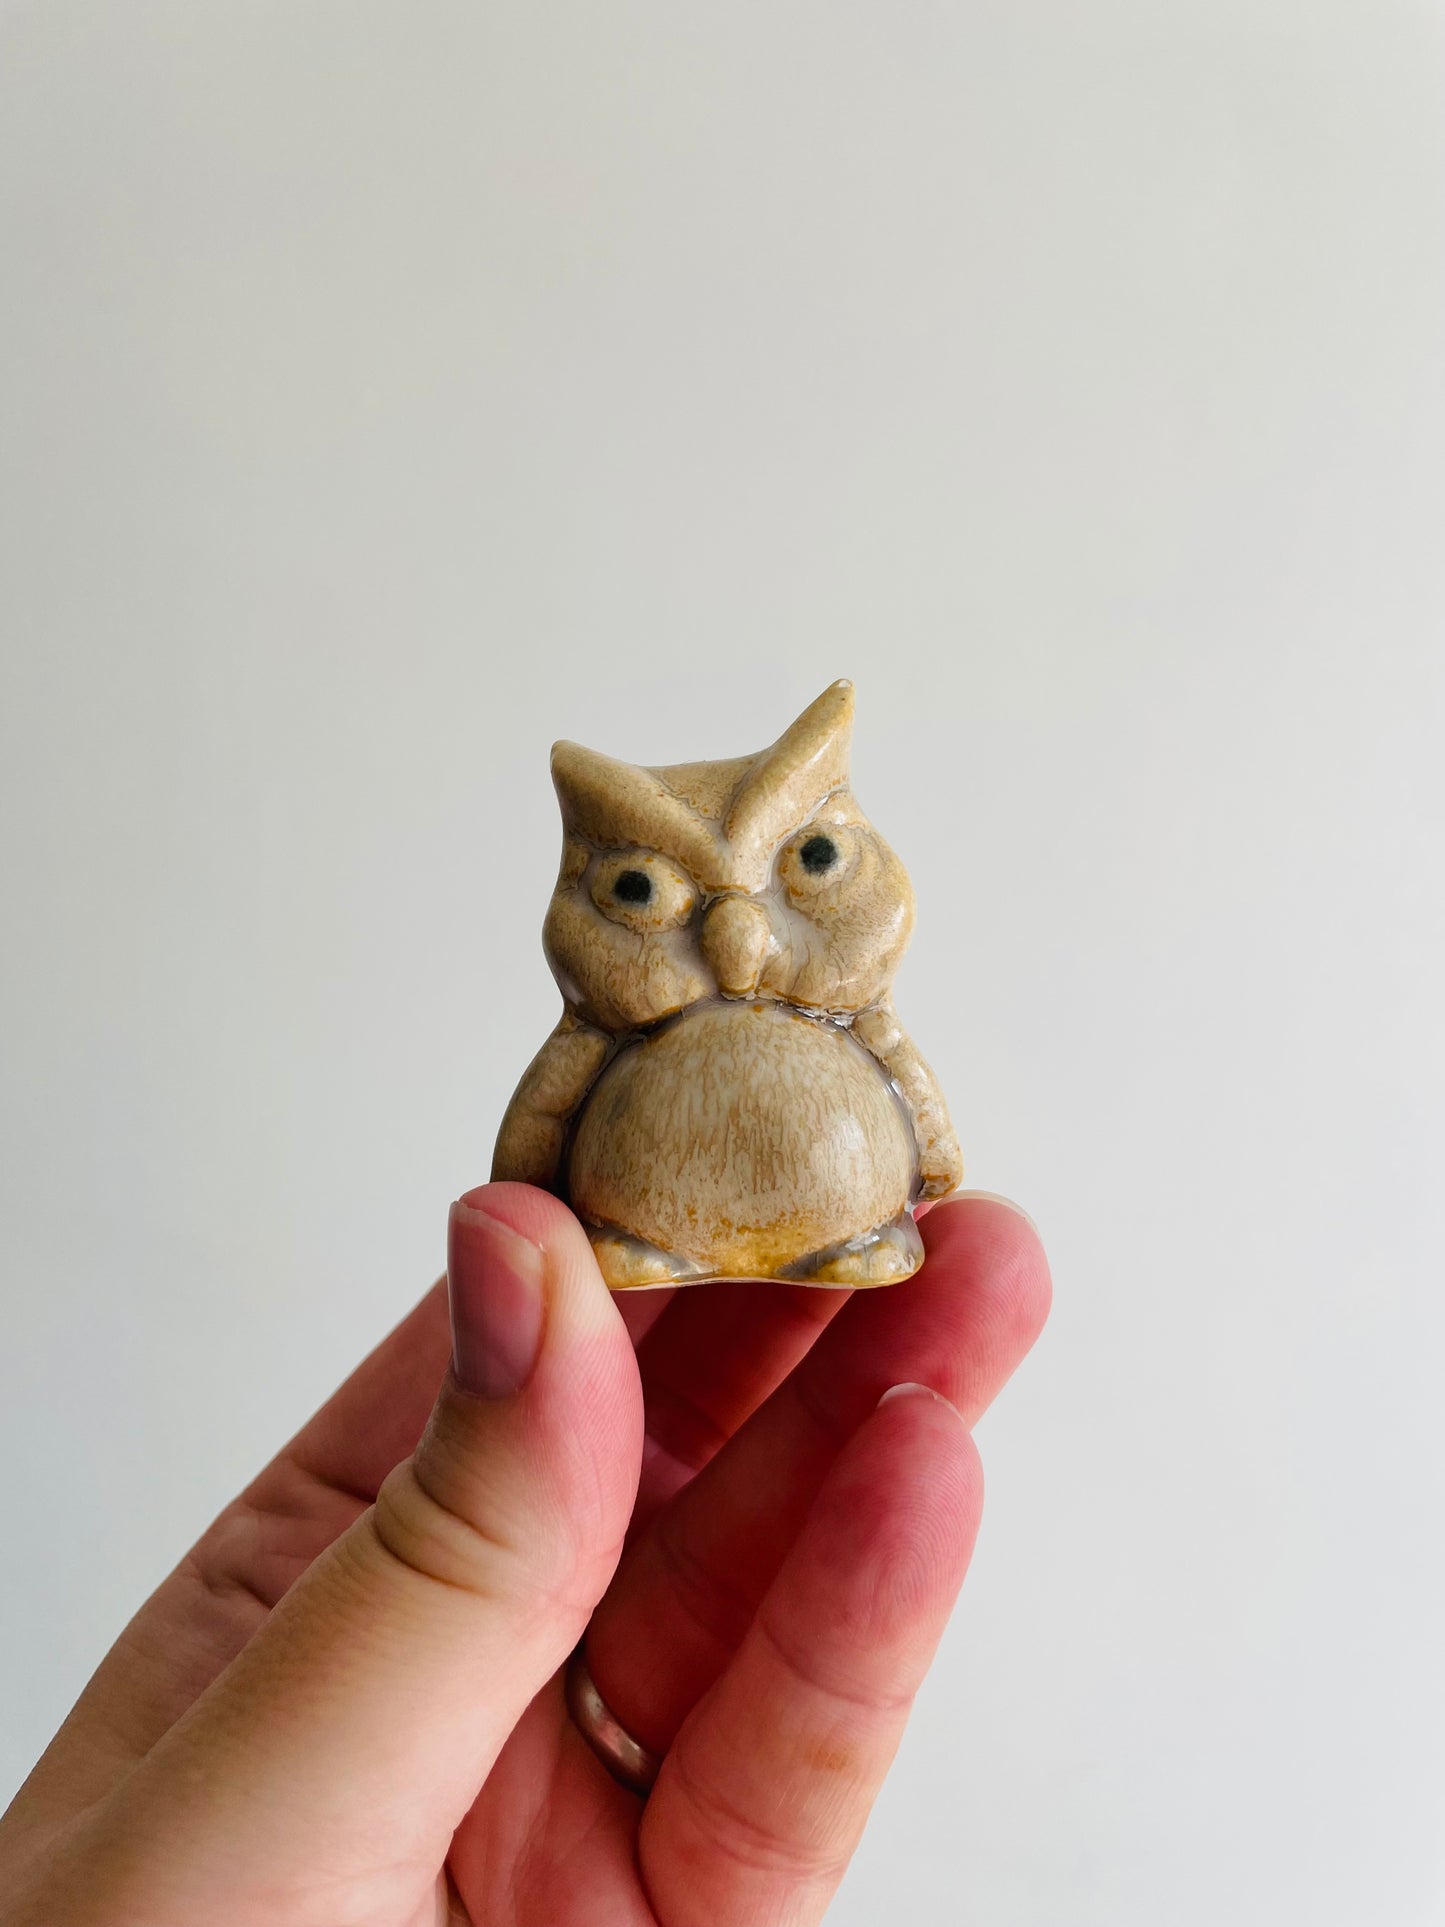 Mini Glazed Owl Figurine - Ting Things Hand Crafted in Canada